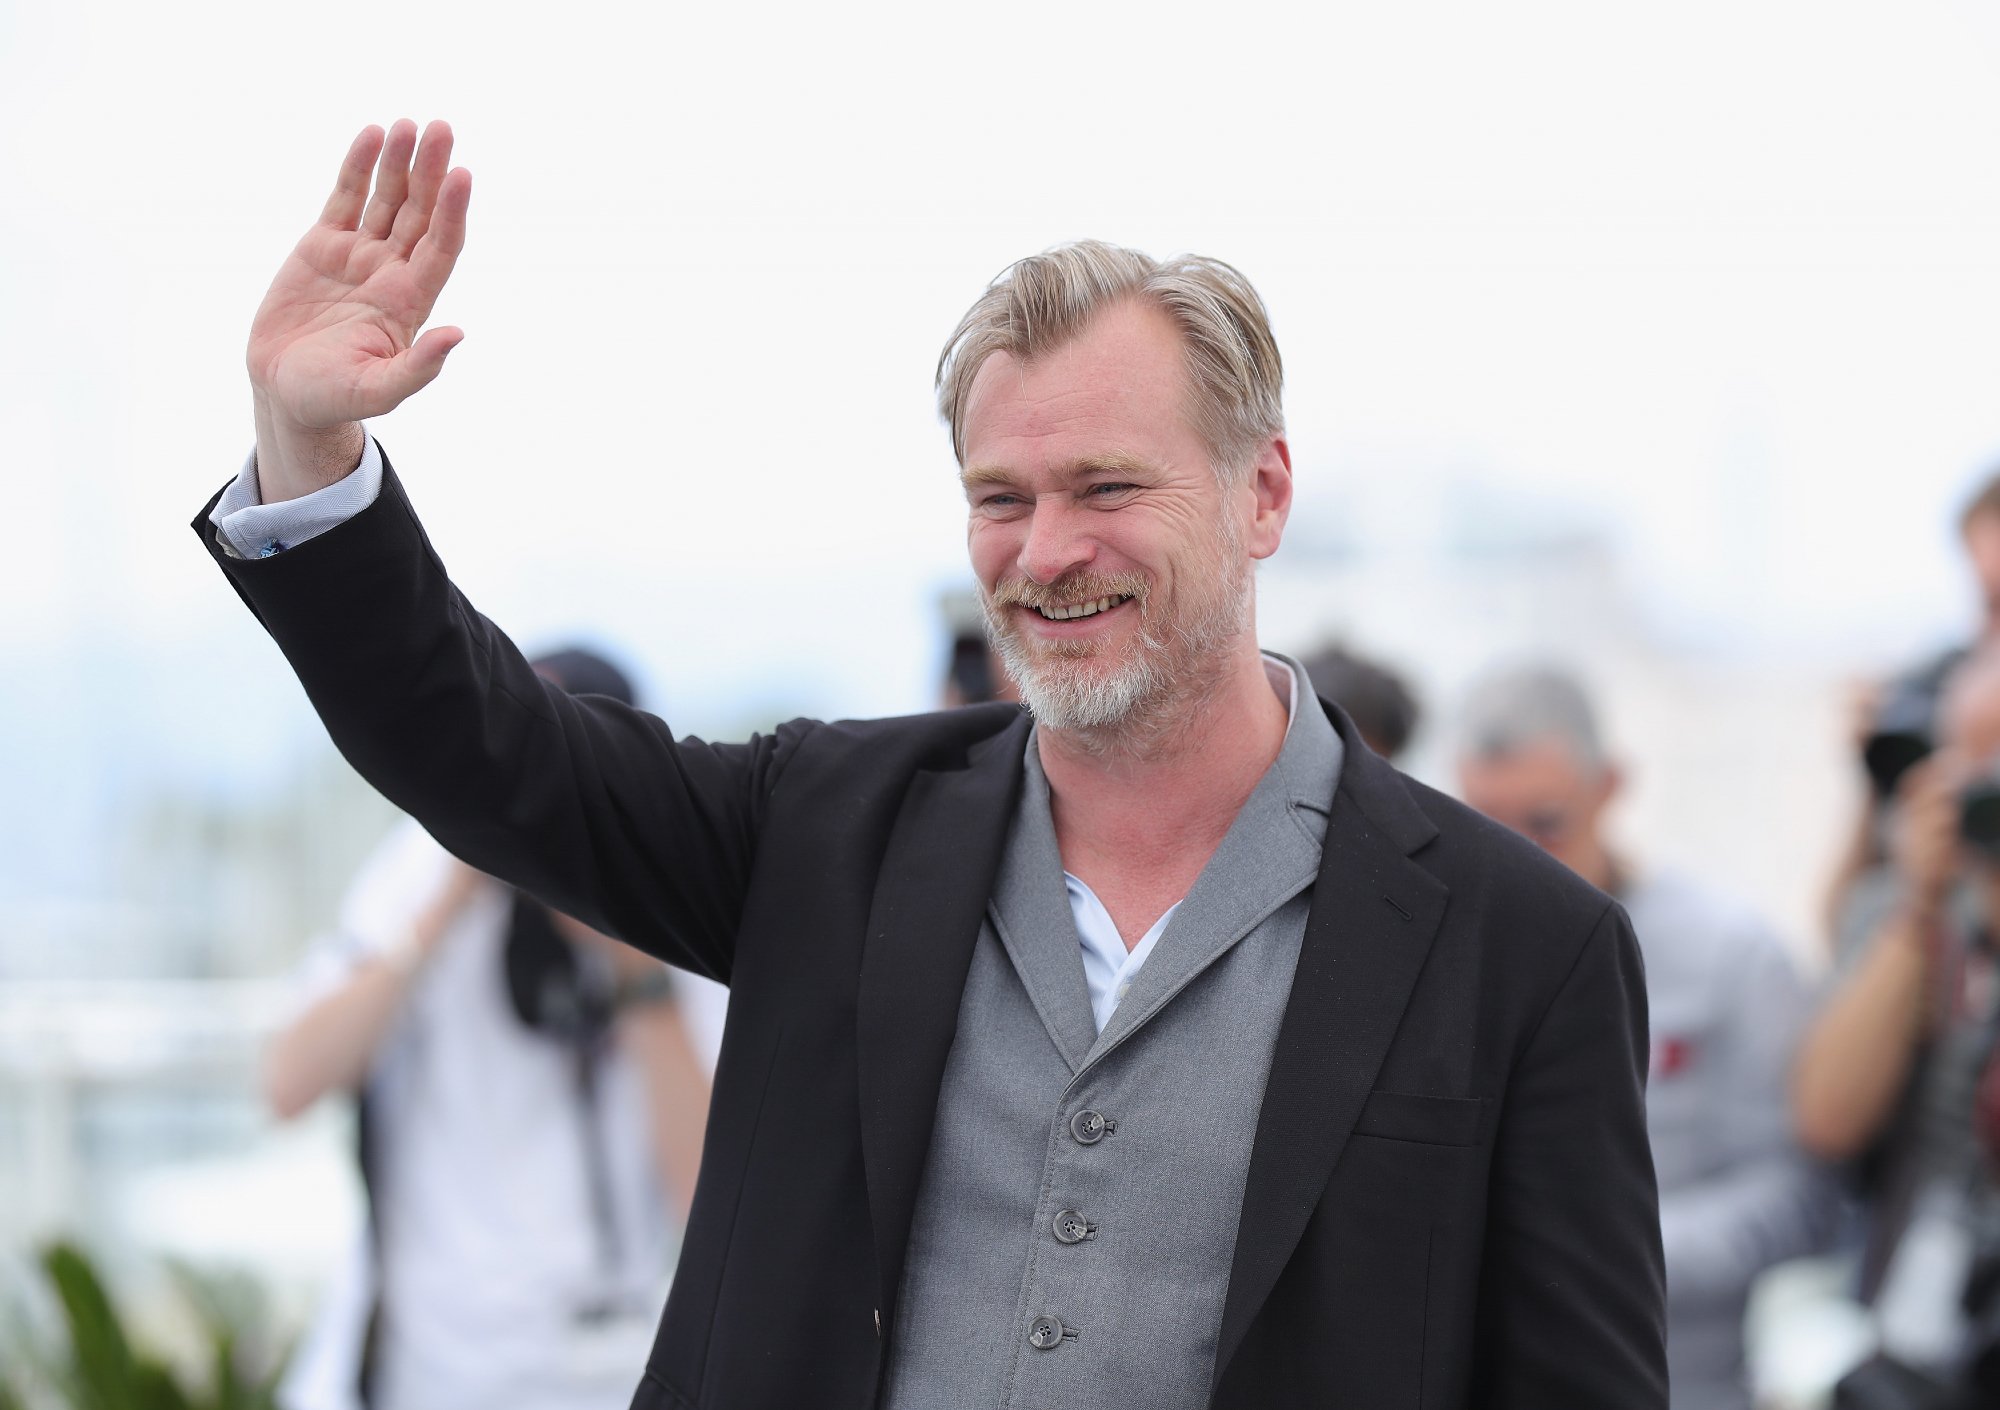 WWII 'Dunkirk' filmmaker Christopher Nolan at the 71st annual Cannes Film Festival